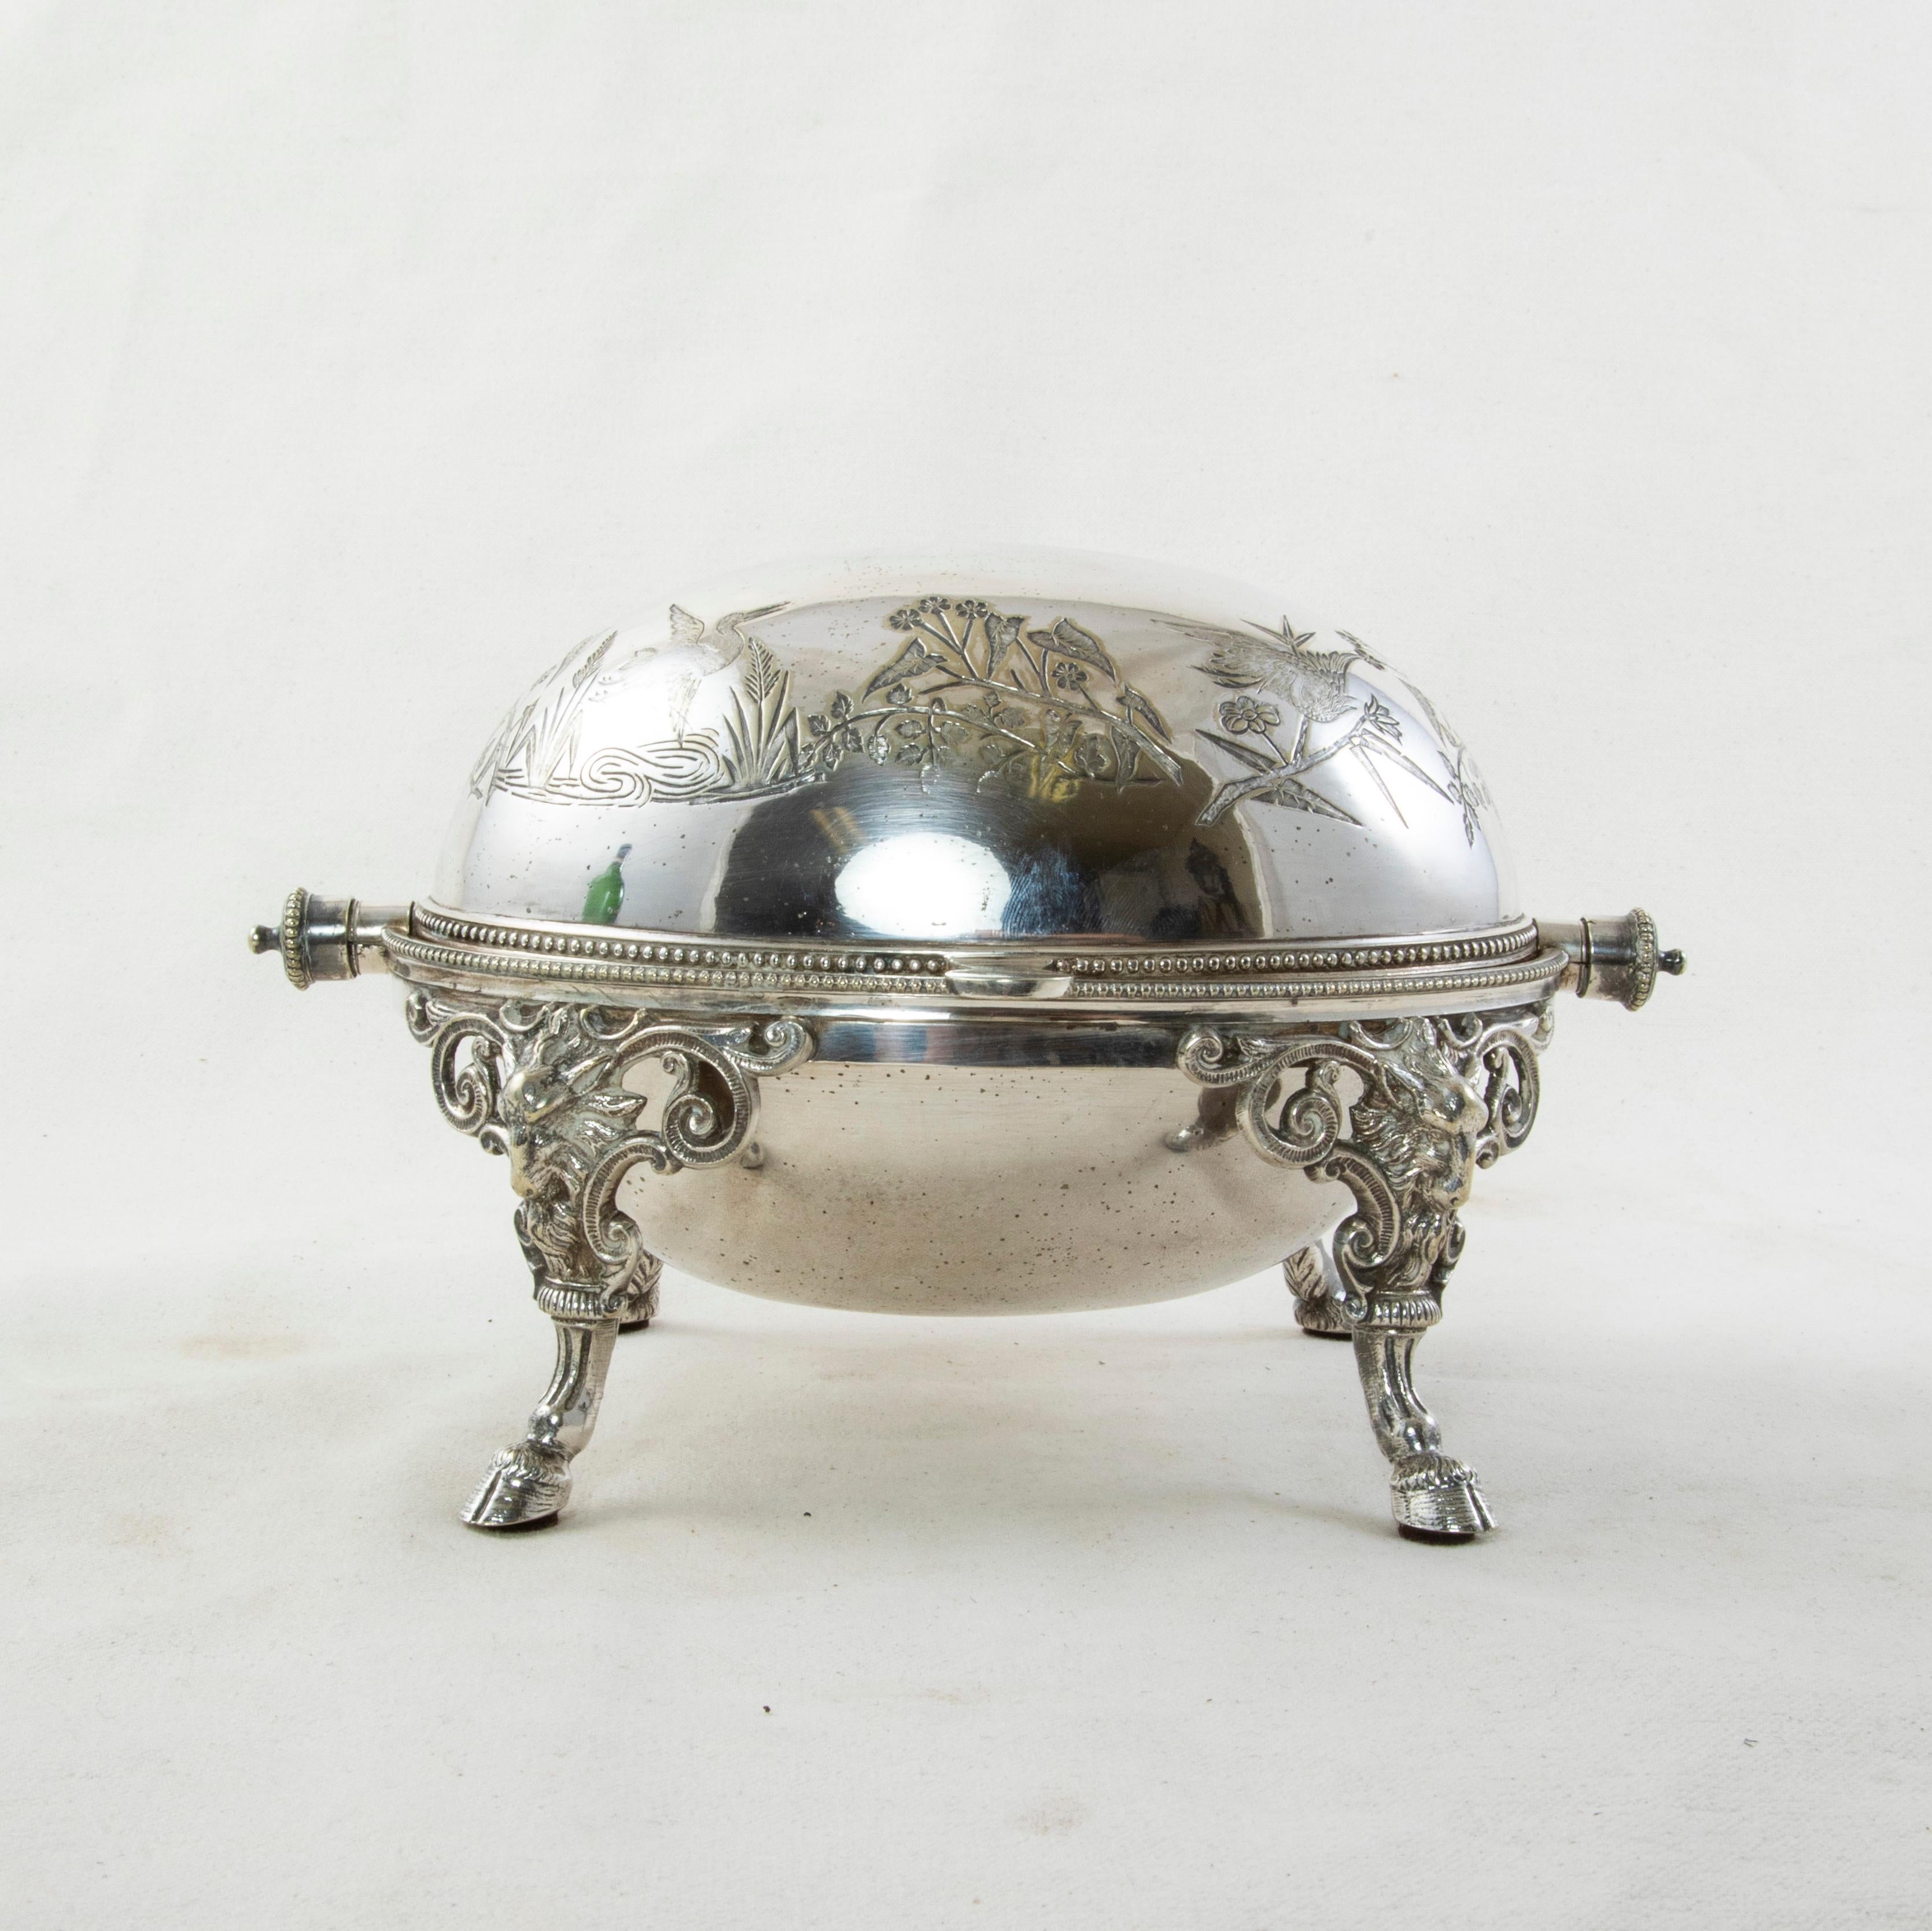 This French silver plate domed serving piece from the turn of the twentieth century features a swiveling lid engraved with egrets and a floral motif. The domed bowl rests on curved legs detailed with a scrolling pattern, rams heads, and hooved feet.